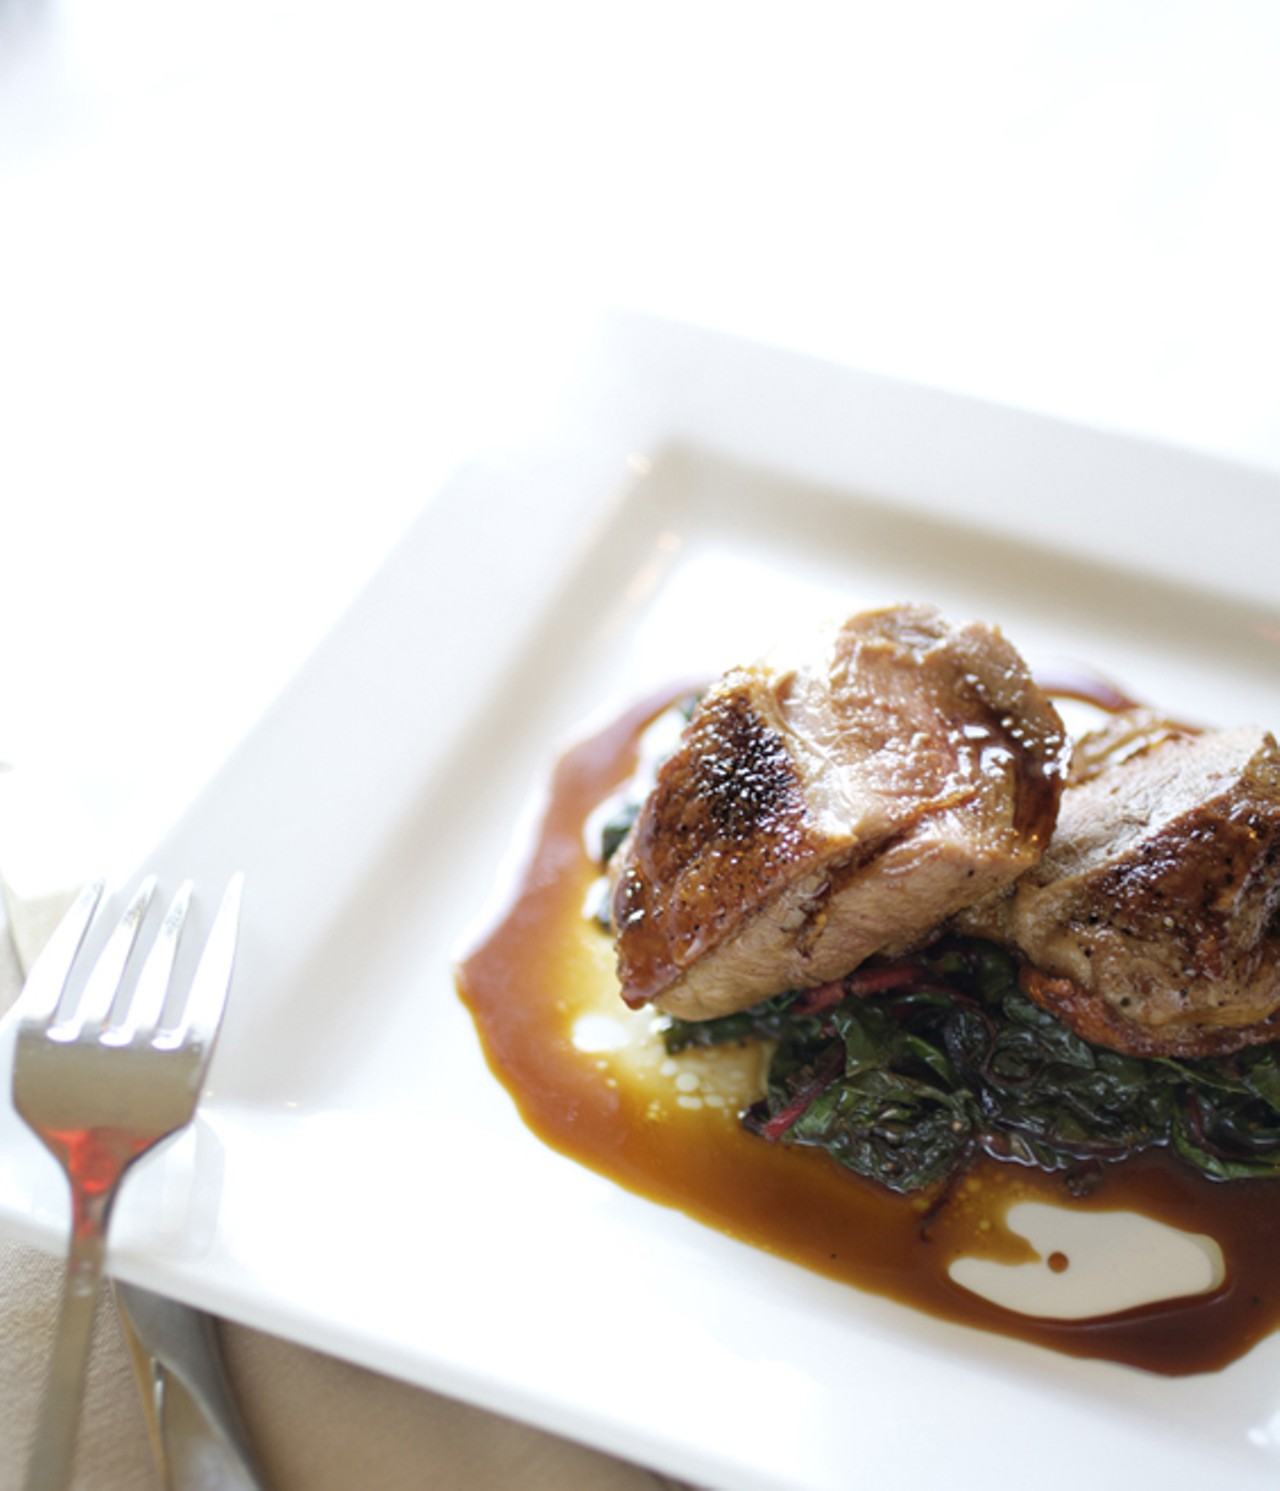 Sorghum laquered duck with swiss chard. The swiss chard is sourced locally.